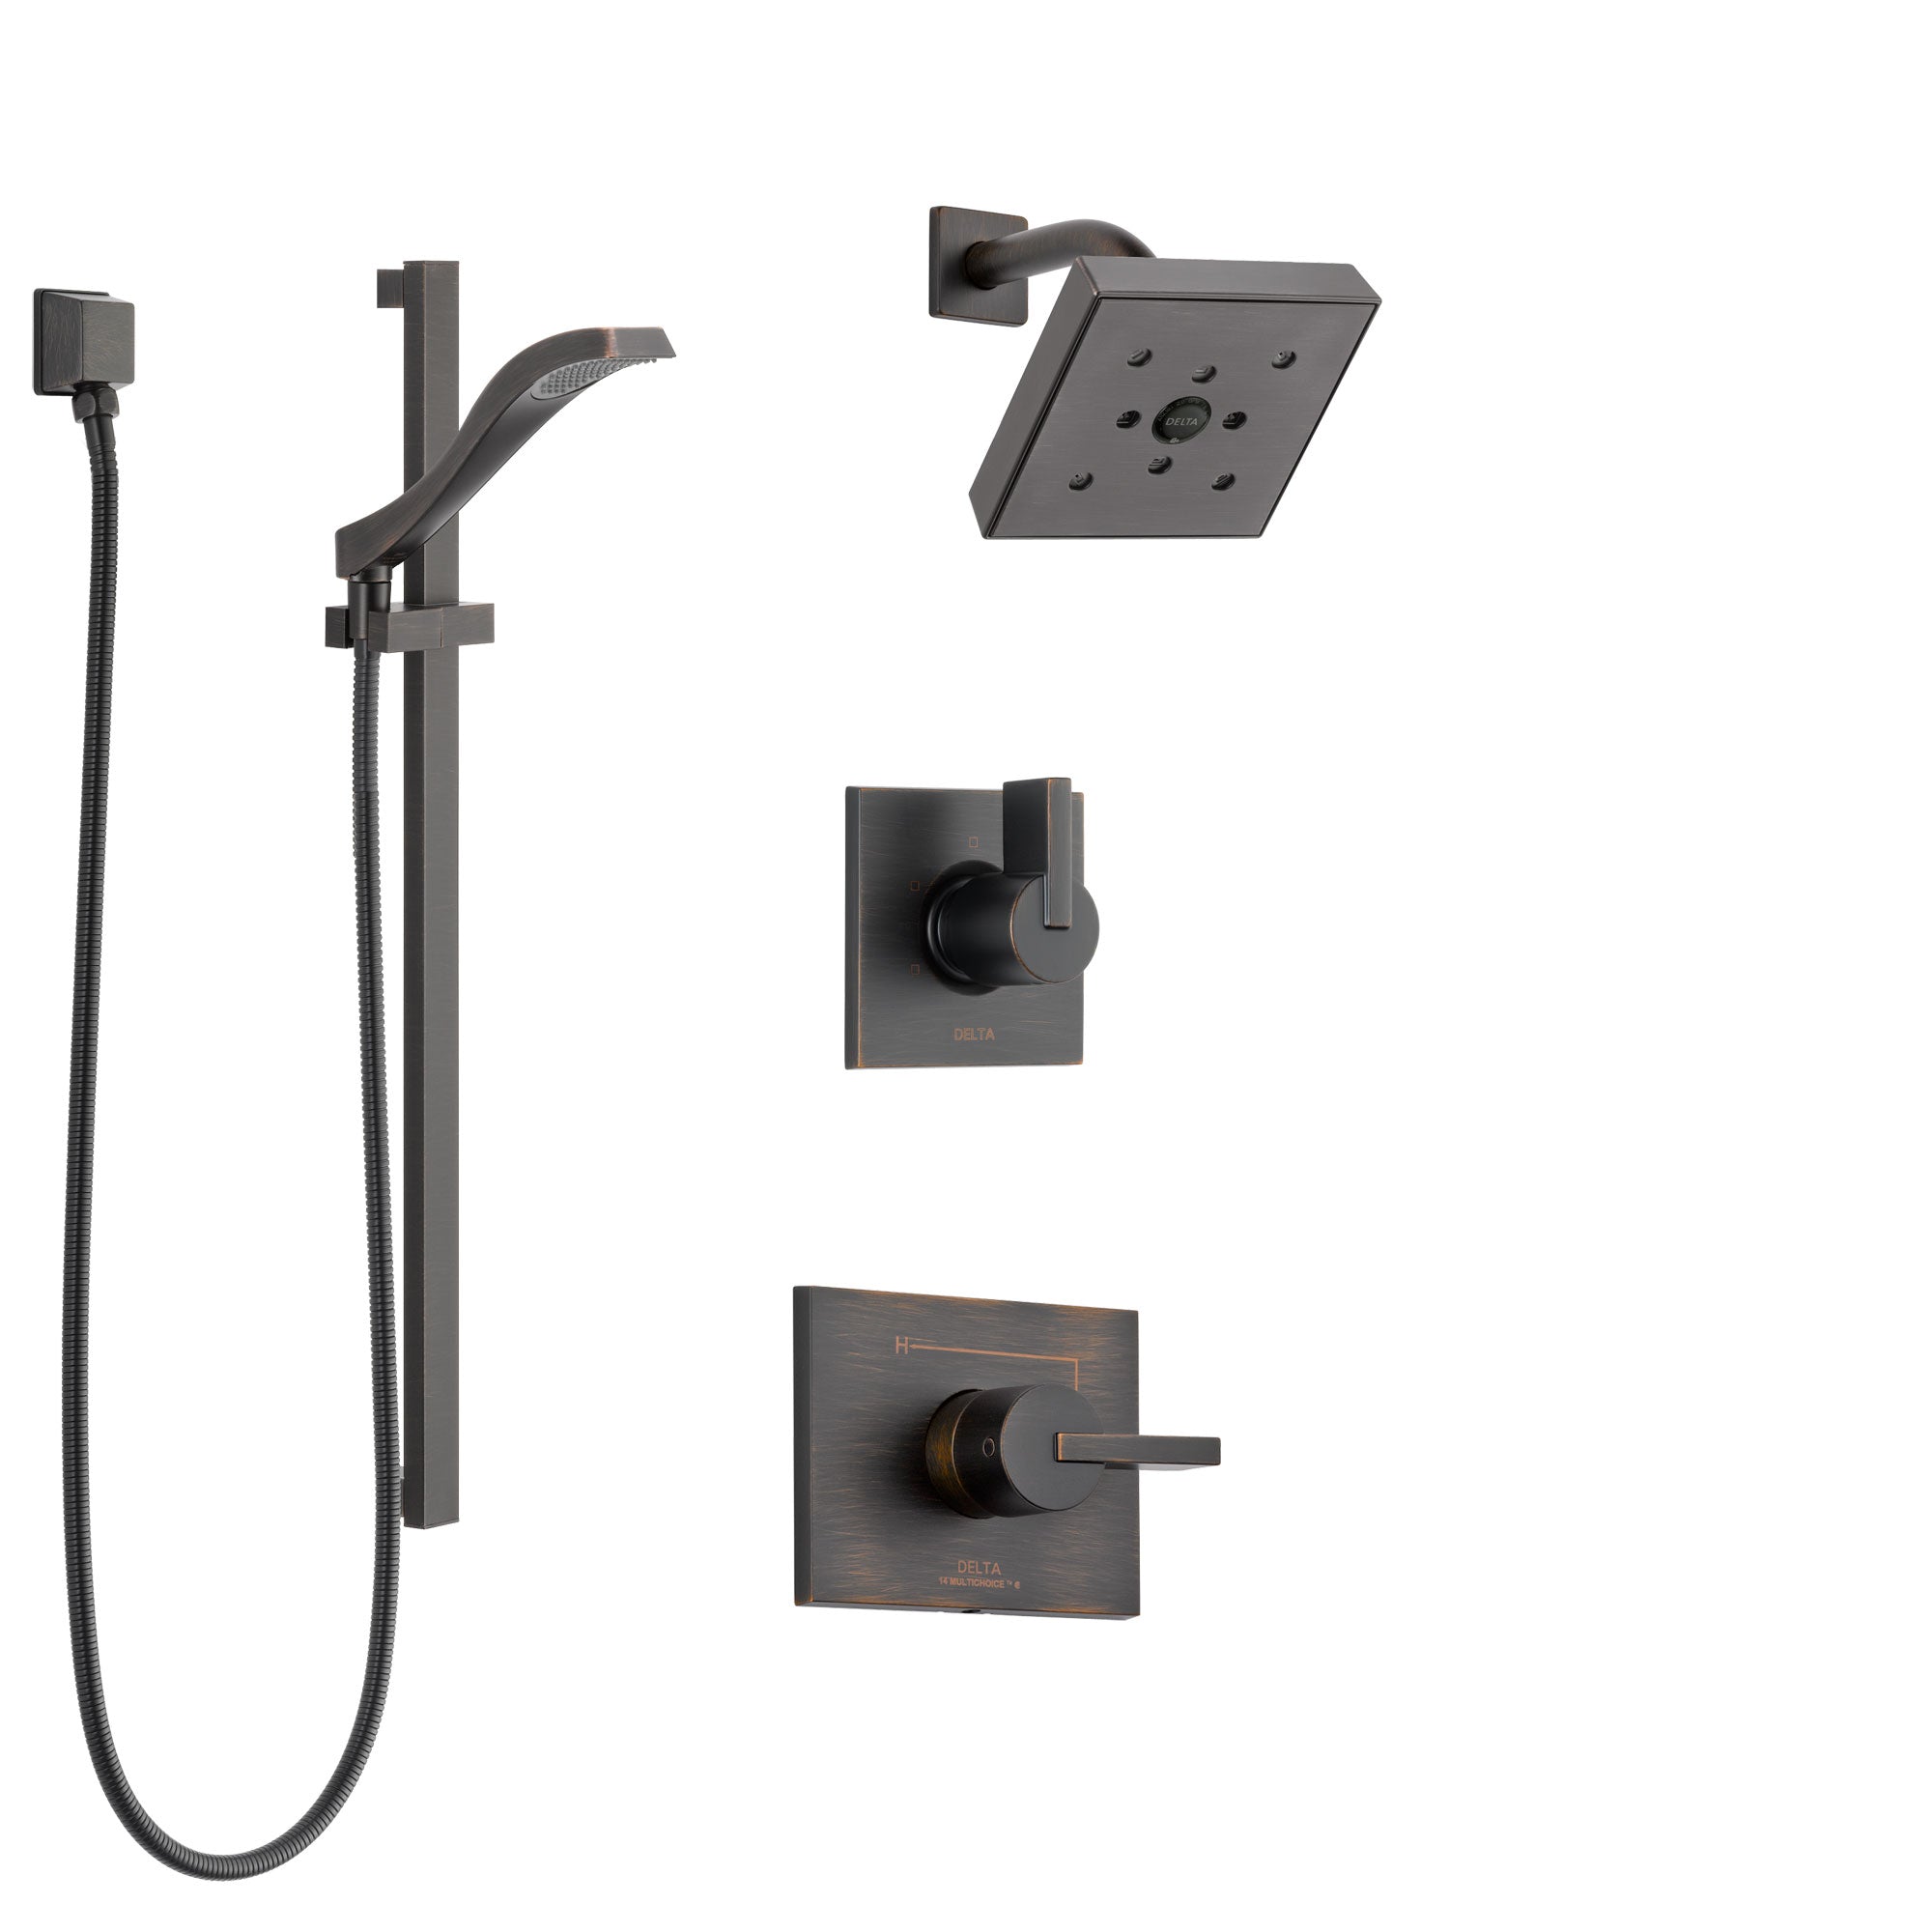 Delta Vero Venetian Bronze Finish Shower System with Control Handle, 3-Setting Diverter, Showerhead, and Hand Shower with Slidebar SS142532RB4